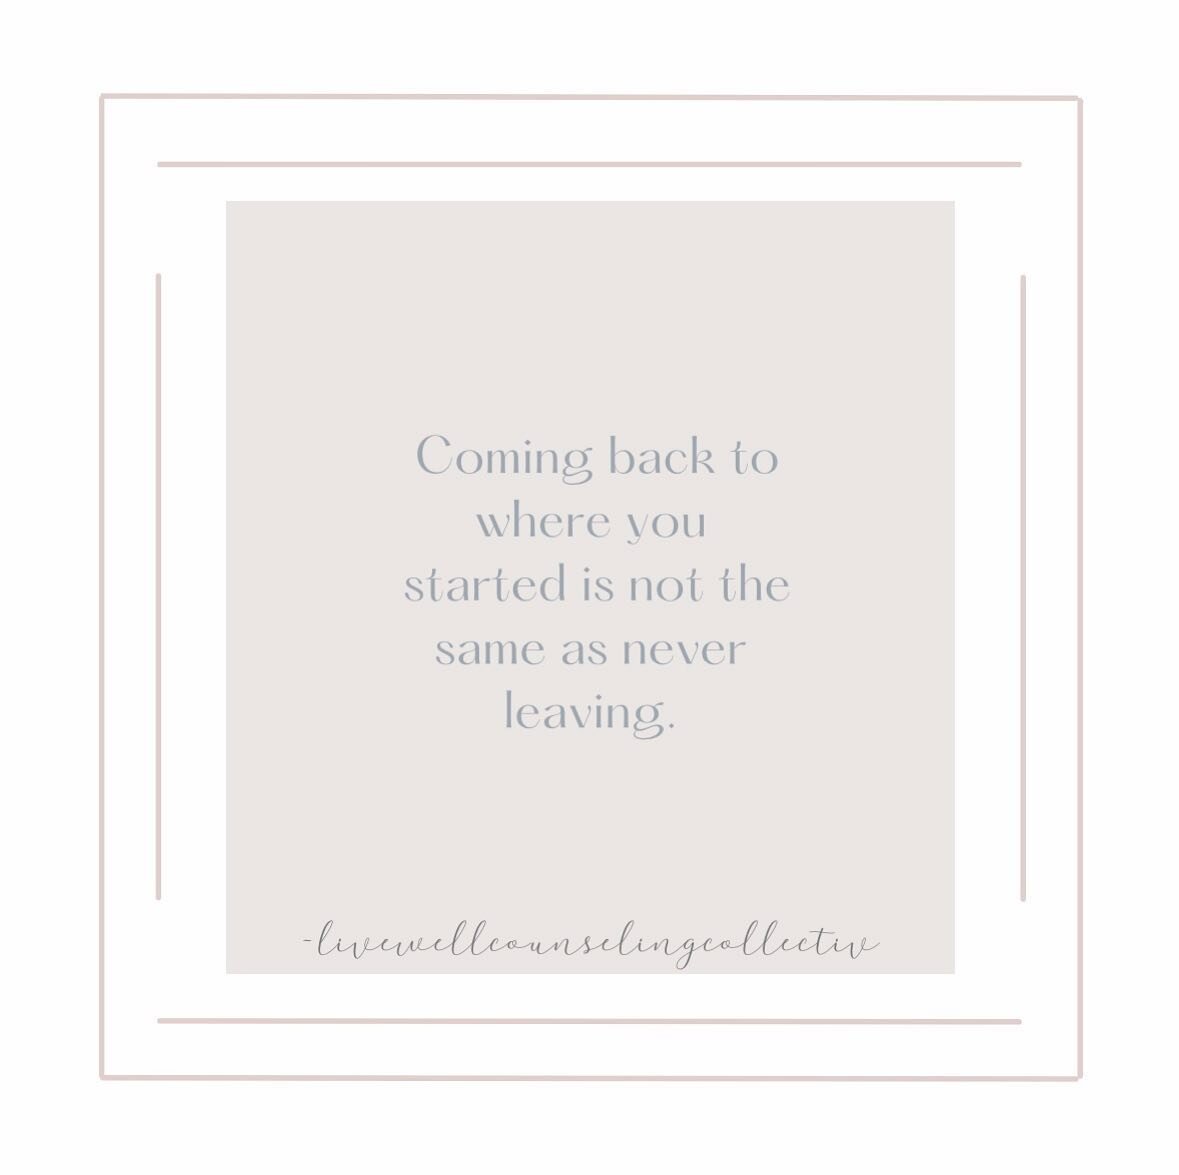 Sometimes, you&rsquo;ve got to go back to where you started in order to realize just how far you&rsquo;ve come. Looking back can show the growth but also leaves room for improvement as well.

. 
.
.
.
.
. 
#improvement
#movingforward
#lookhowfaryouve